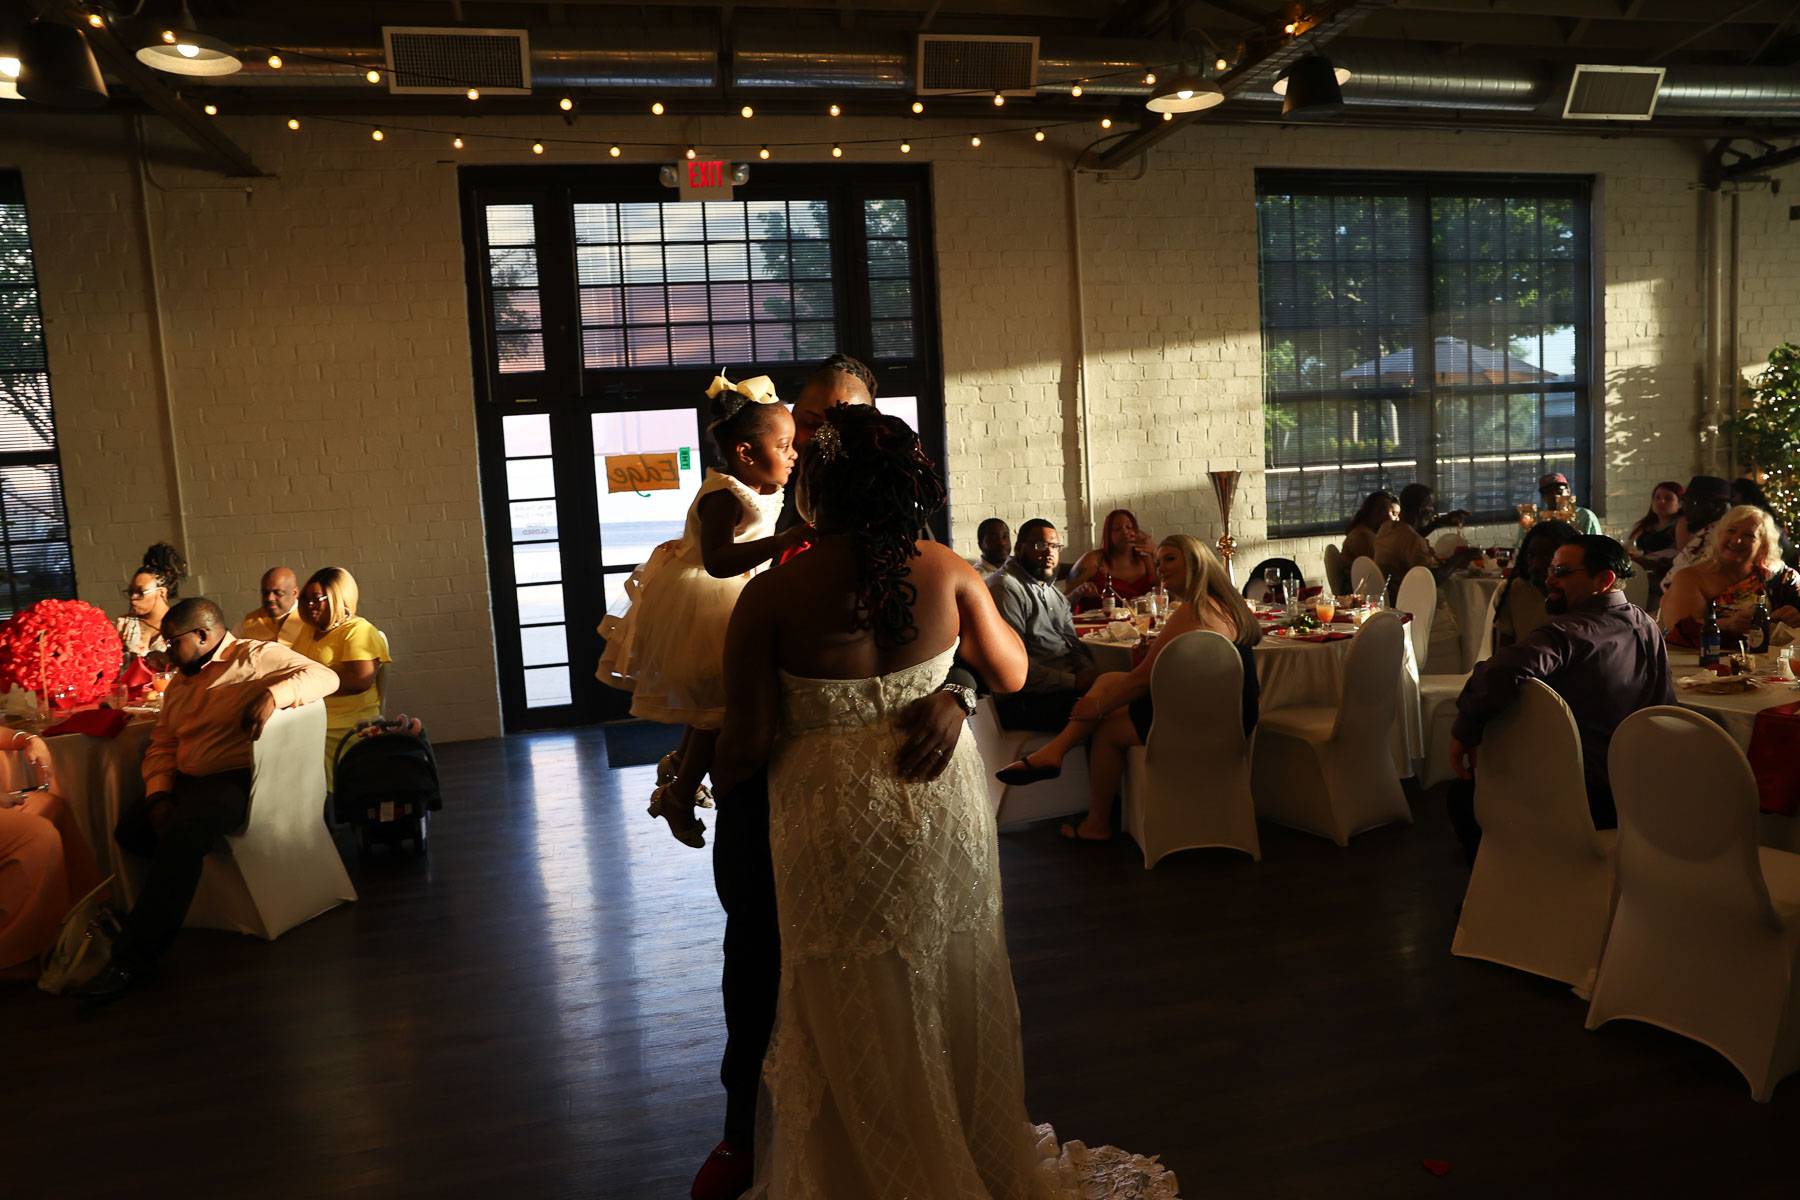 The newlyweds standing at the center of the hall